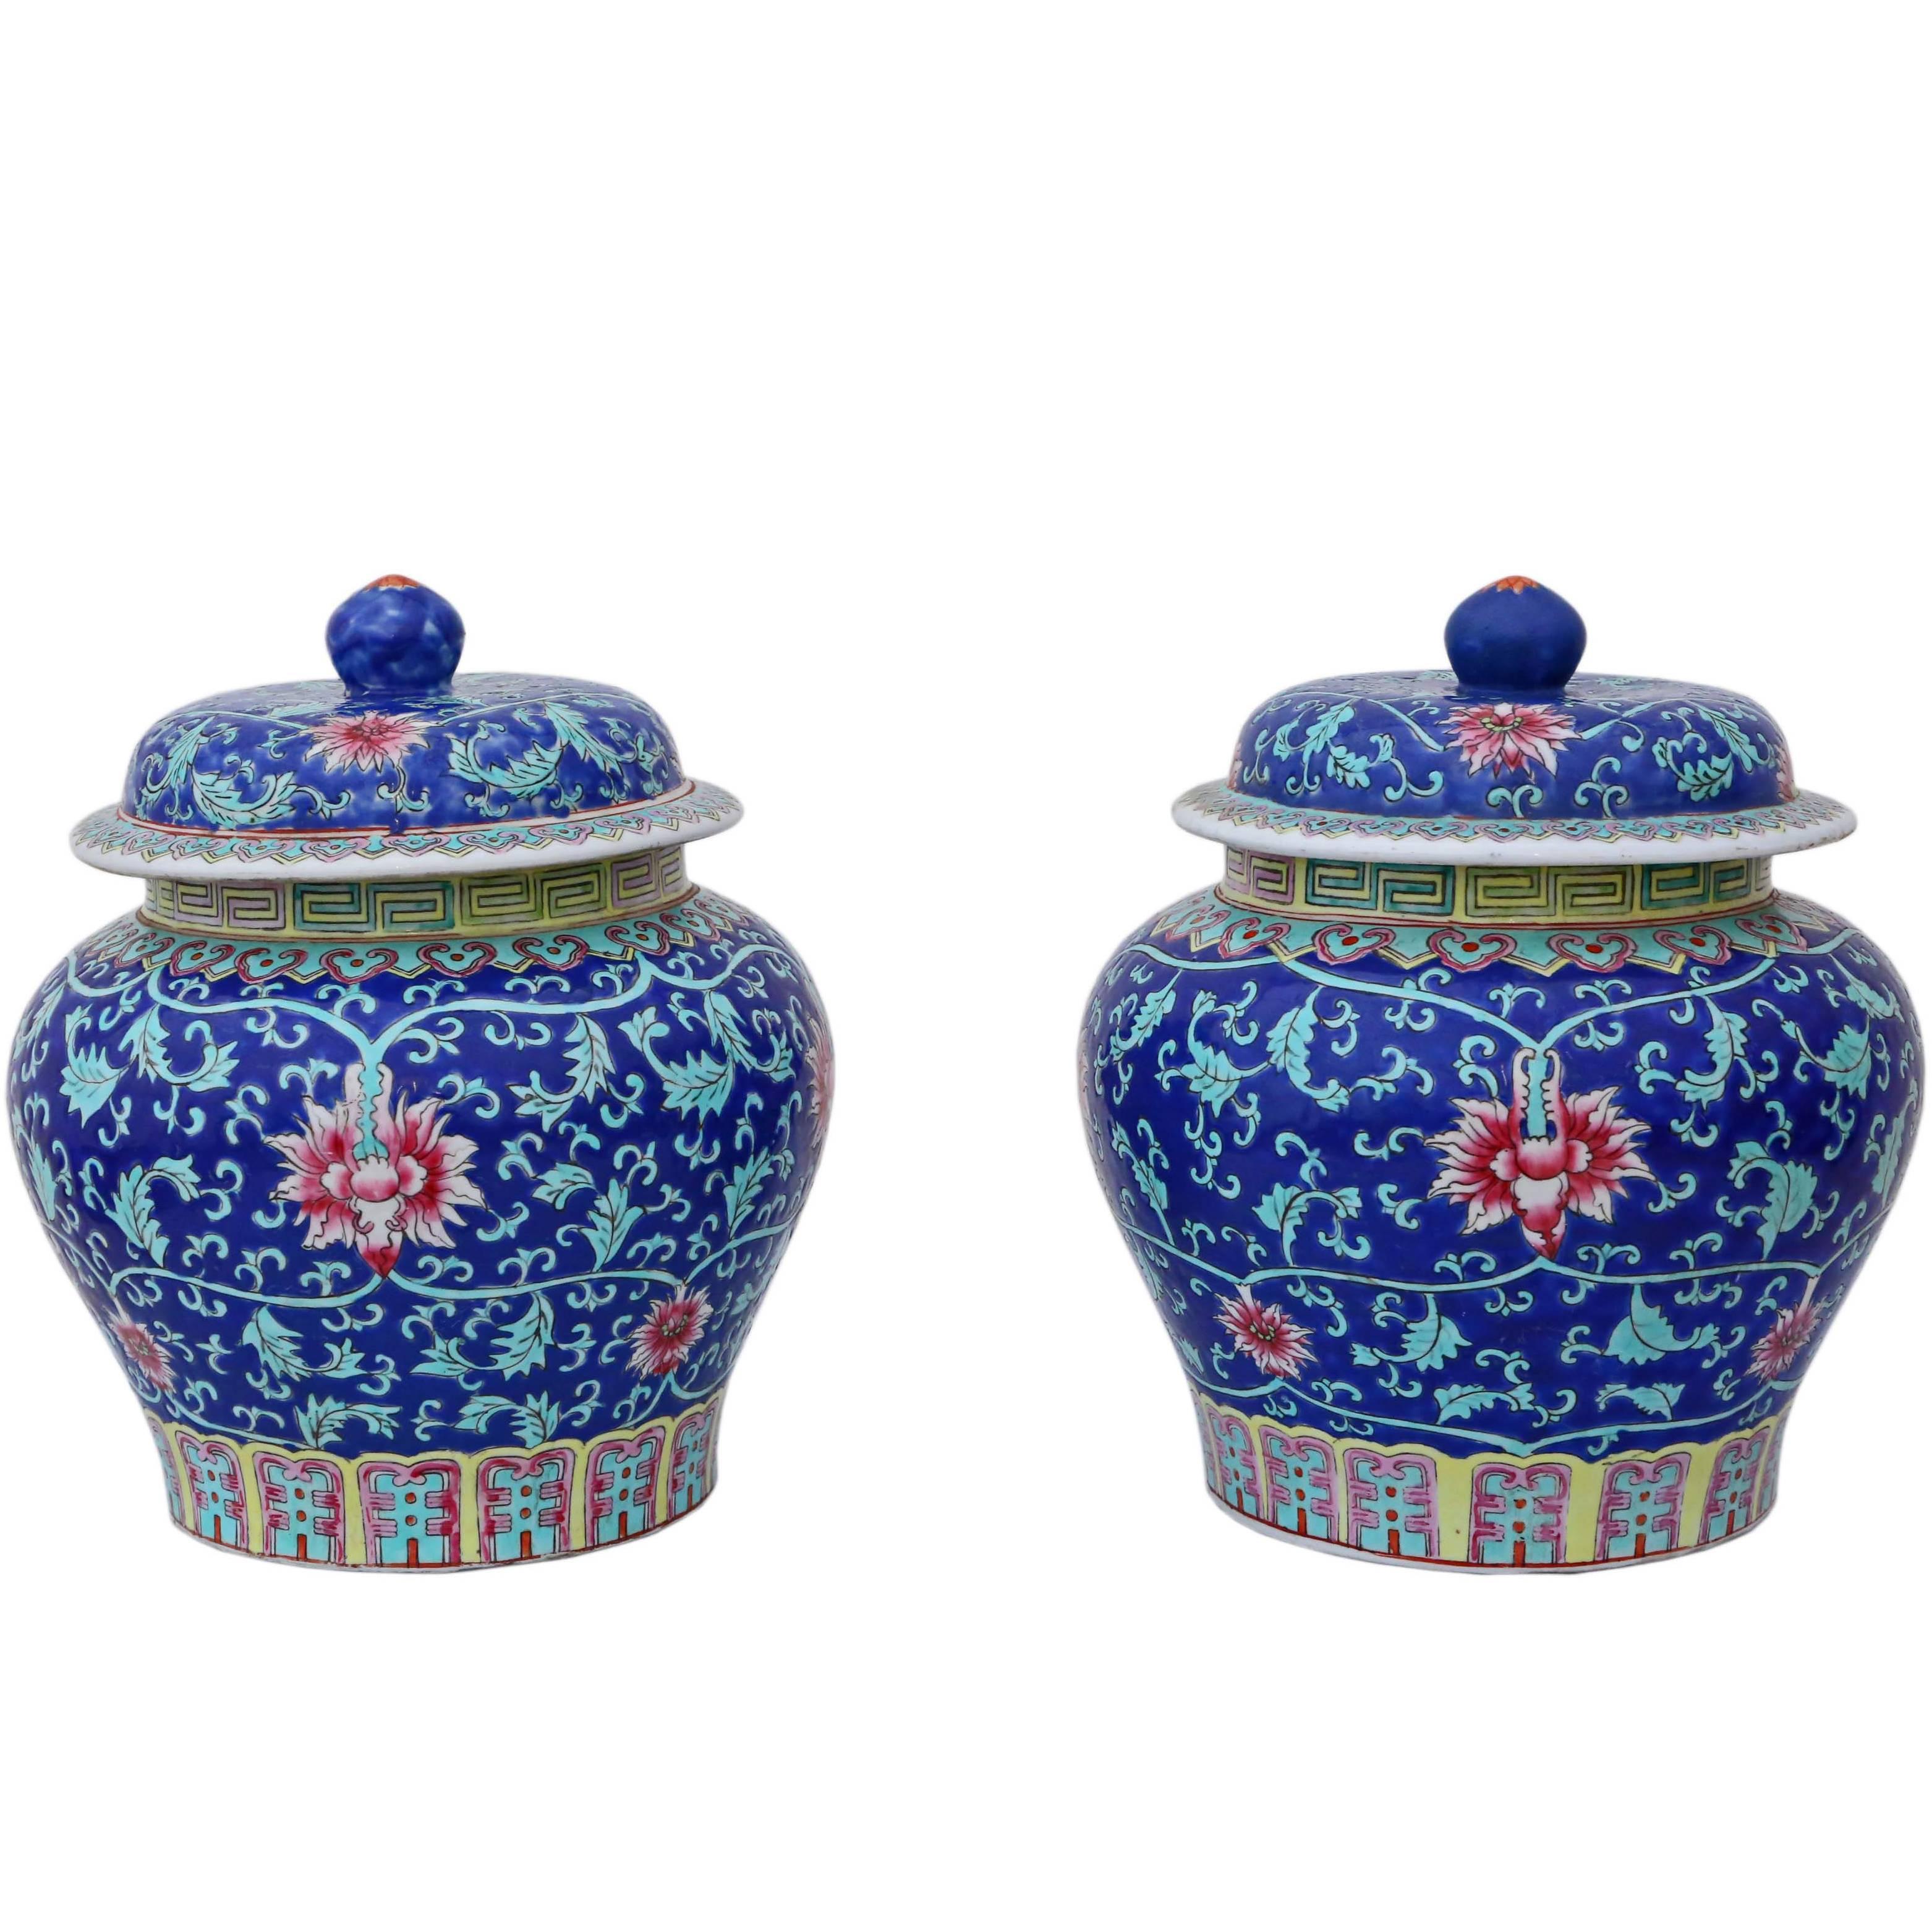 Antique Large Pair of Chinese Republic Period Jars with Lids Ginger Vases For Sale